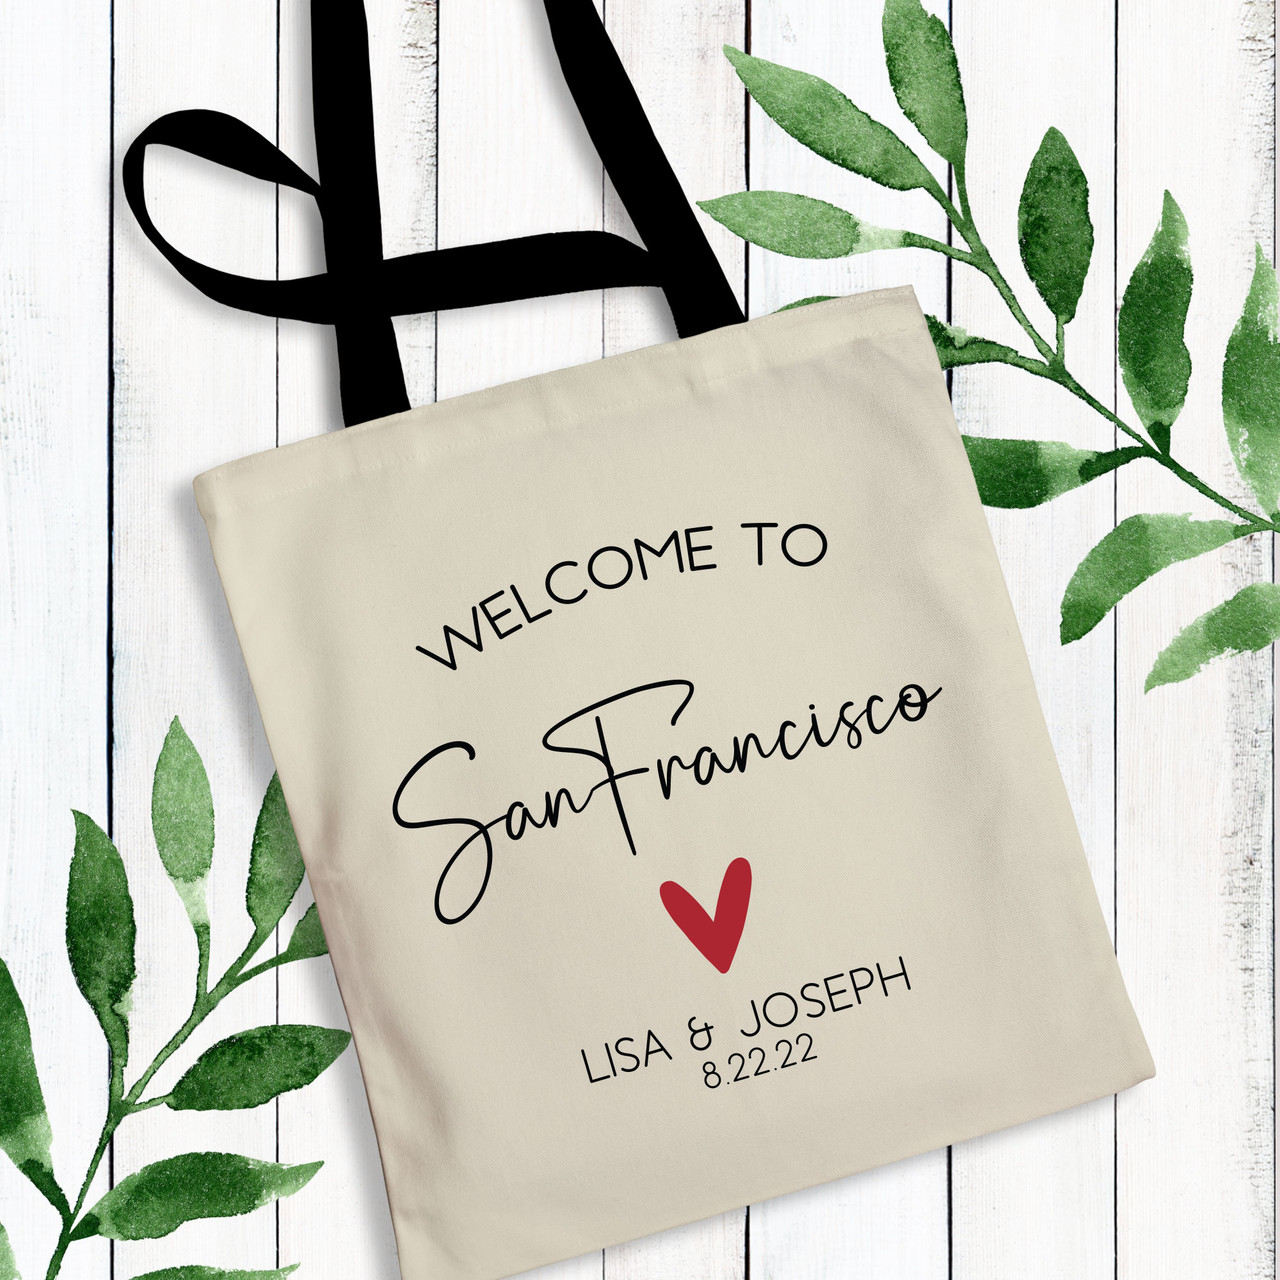 Wedding welcome bags  Hotel welcome bags, Wedding welcome bags, Wedding  welcome gifts